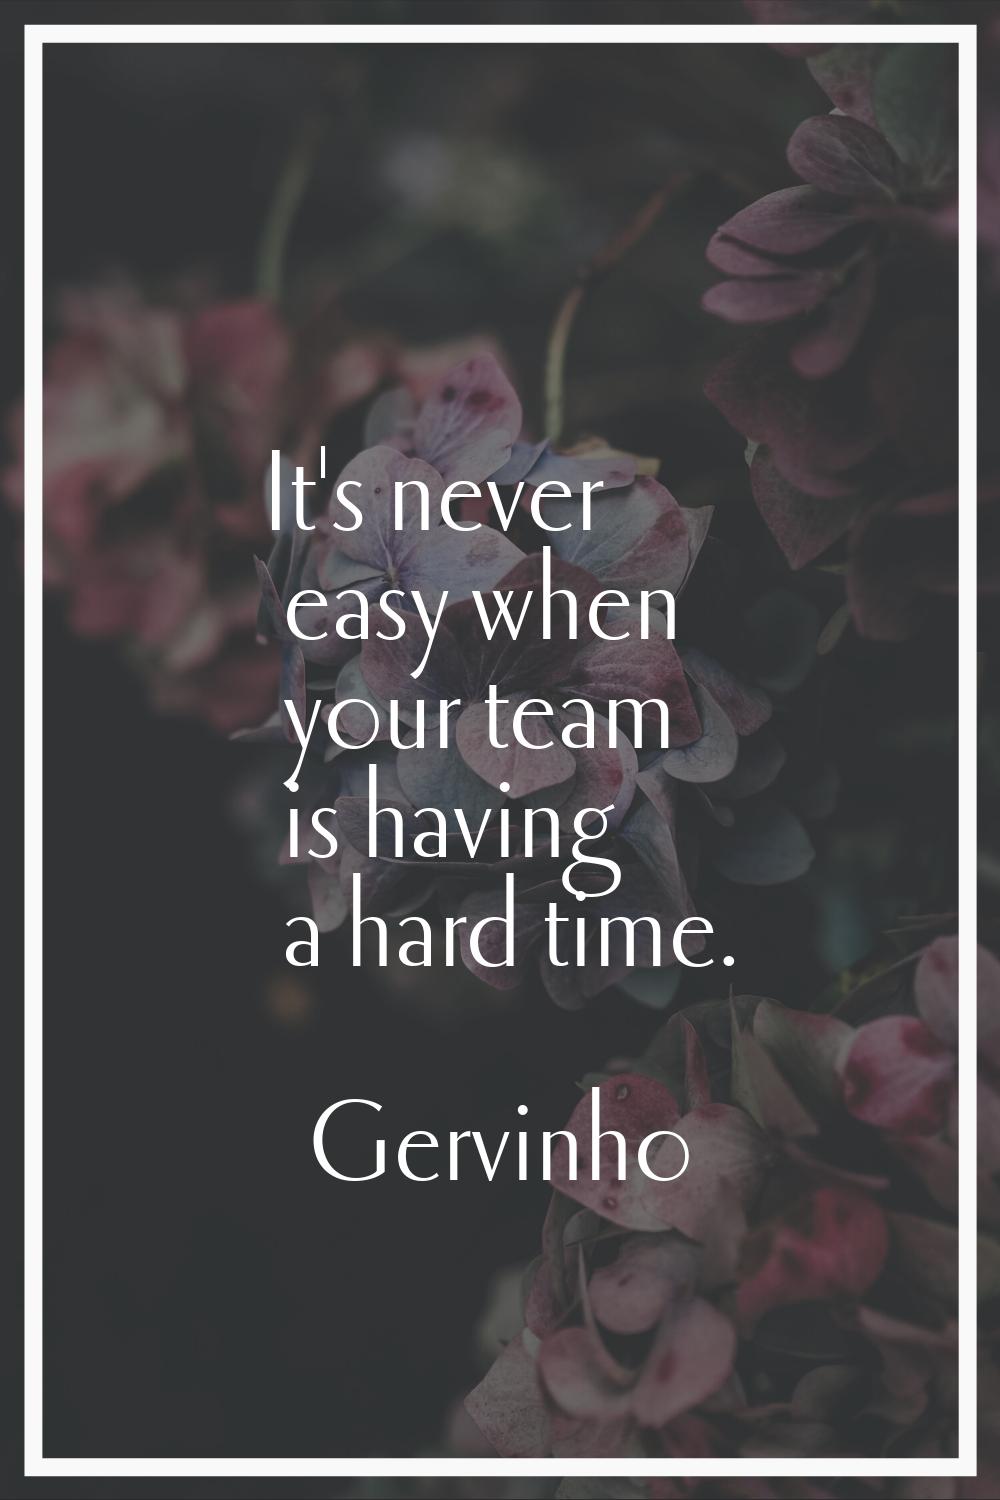 It's never easy when your team is having a hard time.